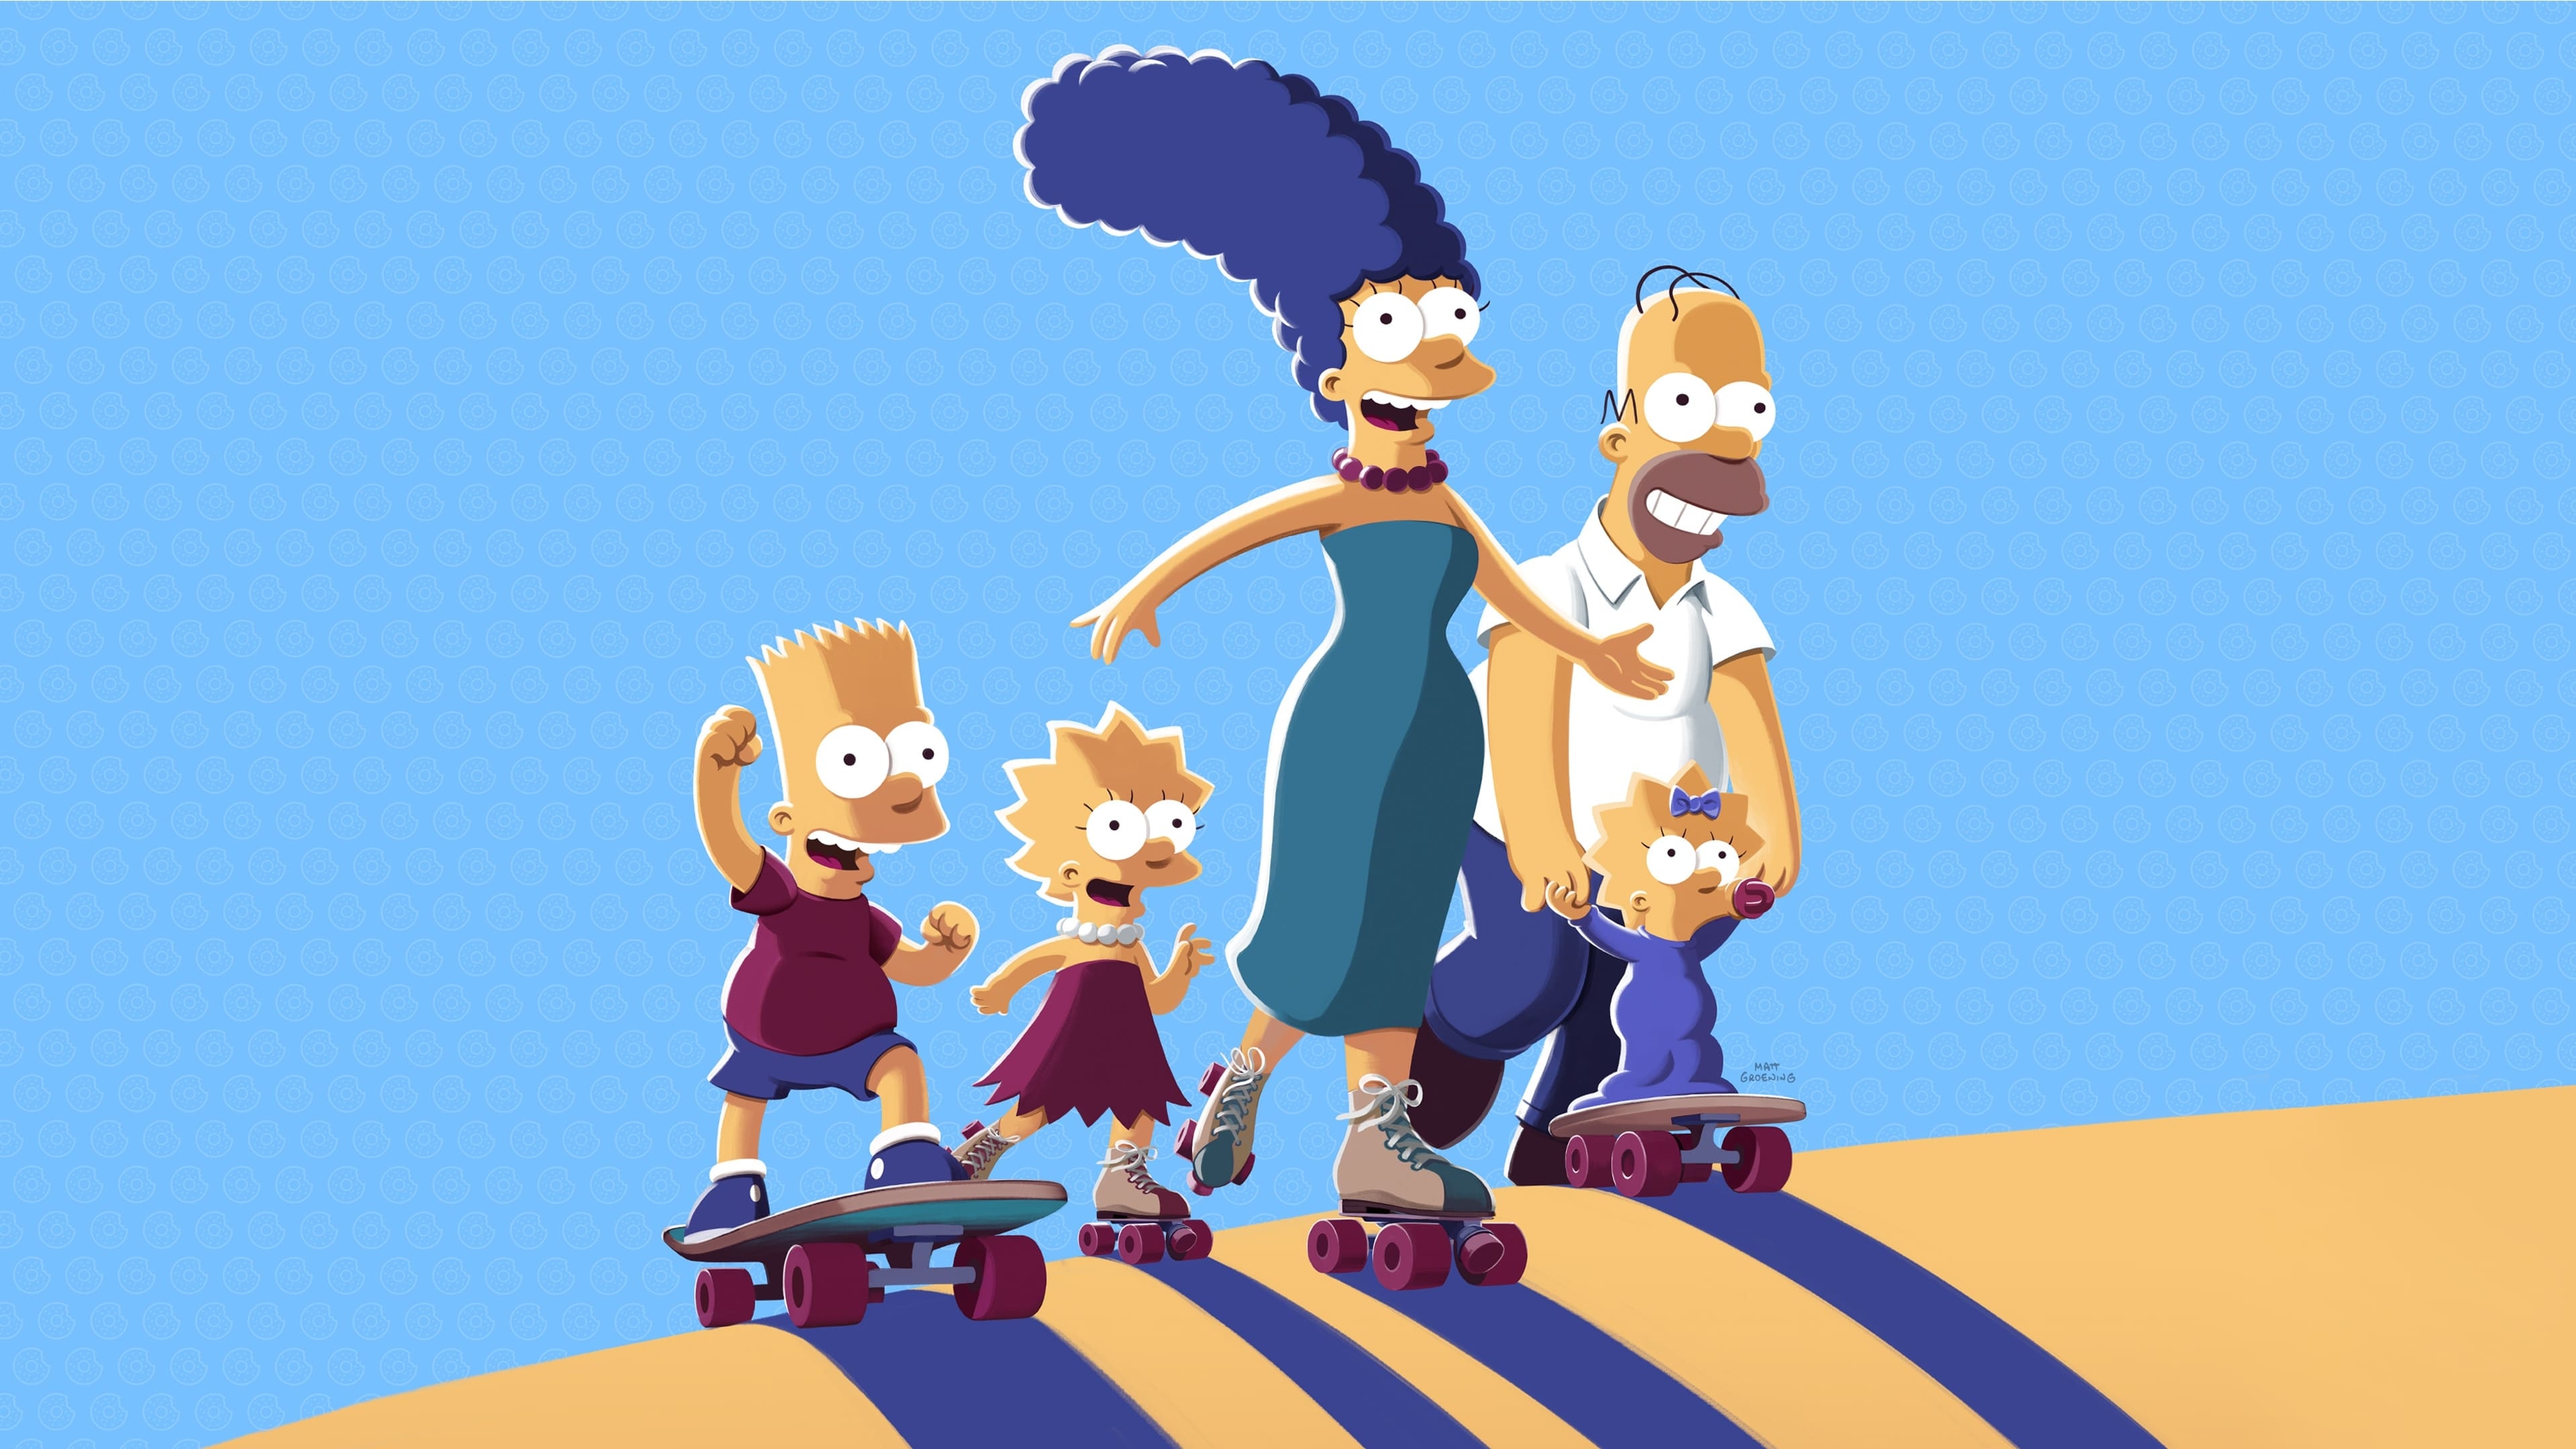 Download The Simpsons Game wallpapers for mobile phone free The Simpsons  Game HD pictures